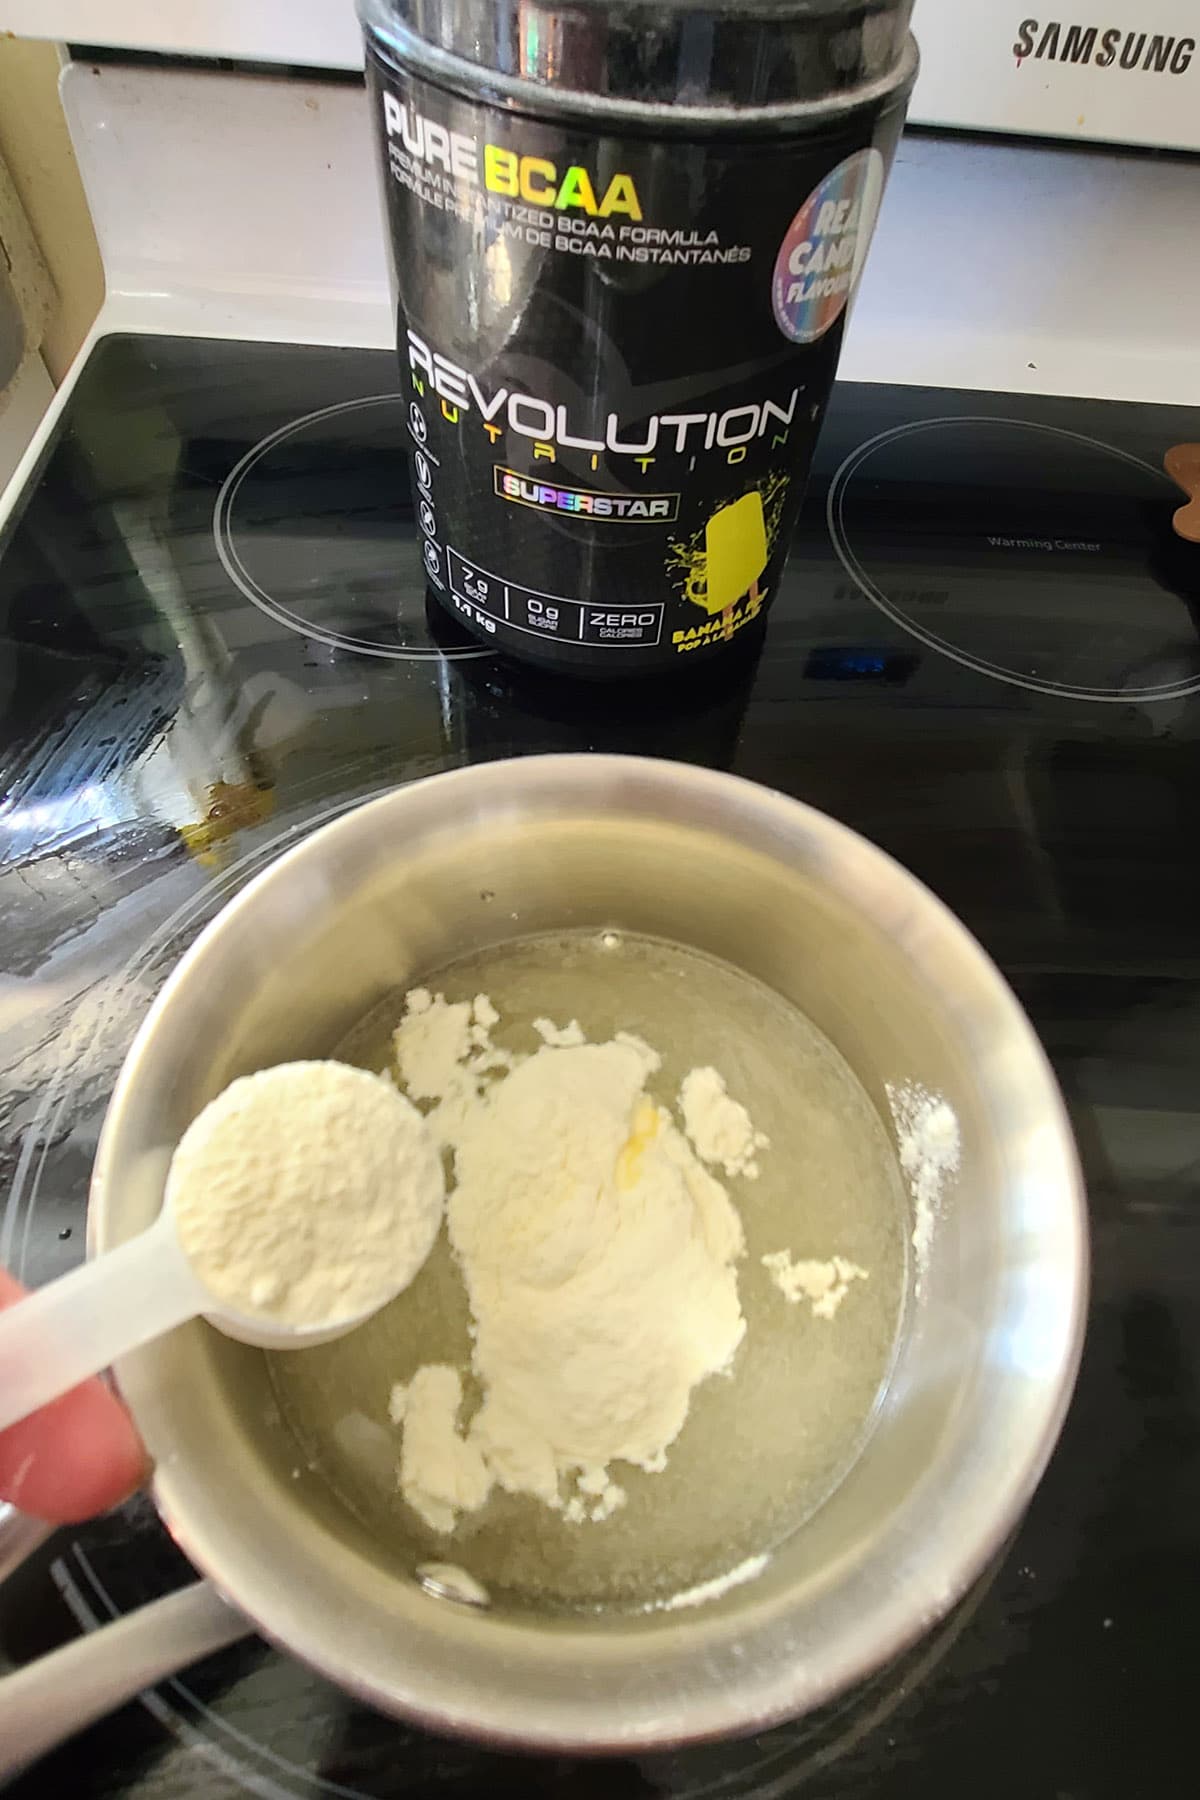 Yellow BCAA powder being added to a small pot of water. A container of Revolution Nutrition's Banana BCAA powder is in the background.